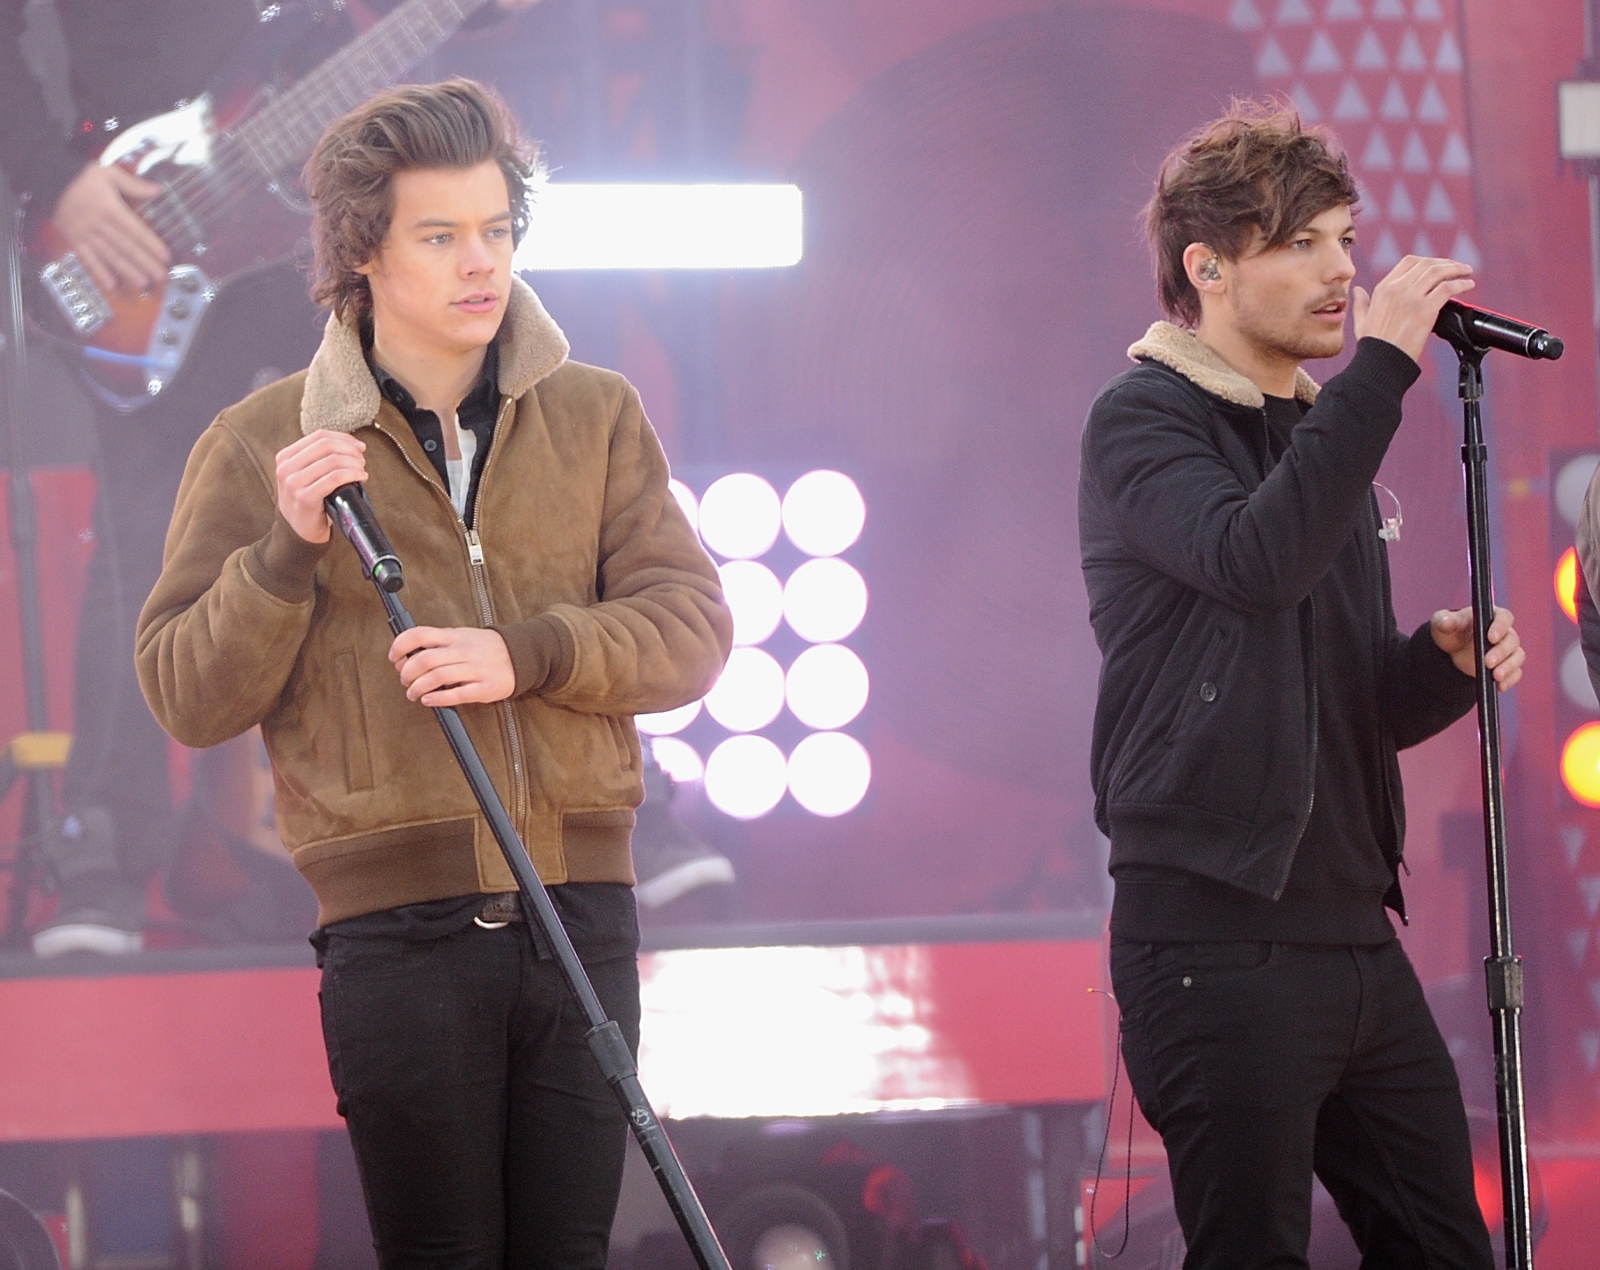 Harry Styles 'fuming' with Louis Tomlinson over Zayn Malik Twitter attack